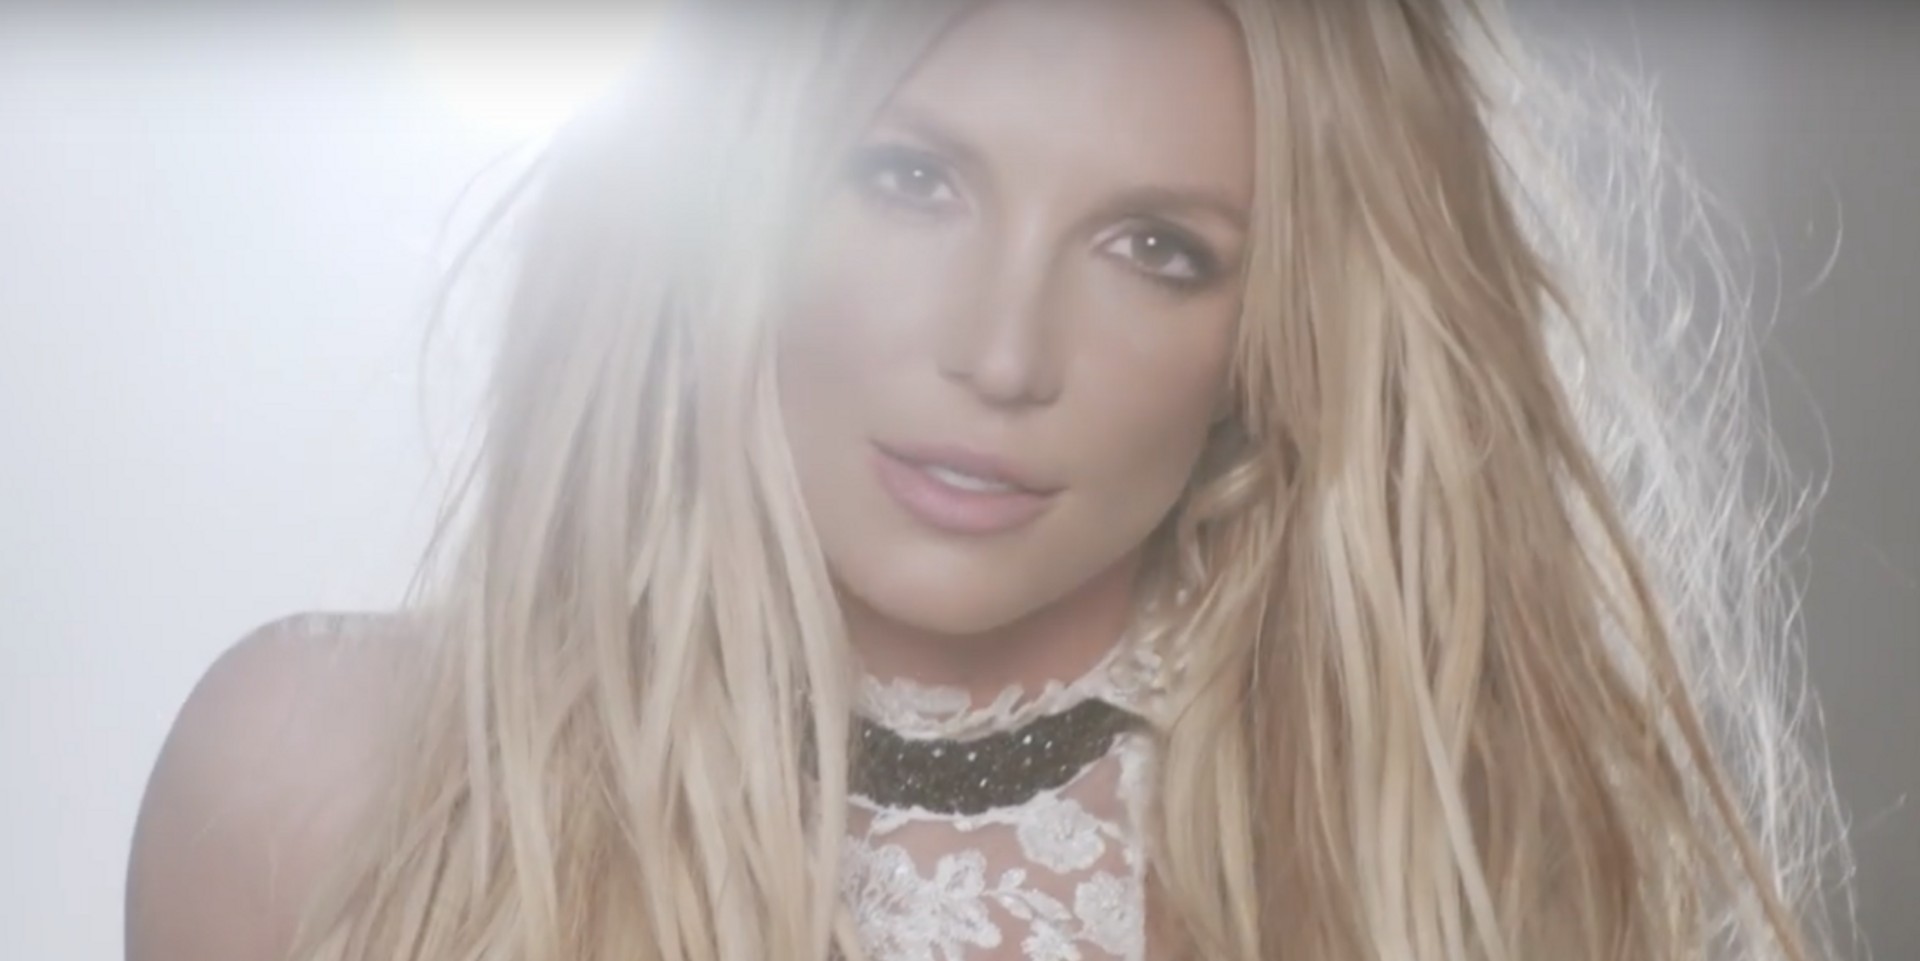 Tickets to Britney Spears' first Manila concert, selling out fast